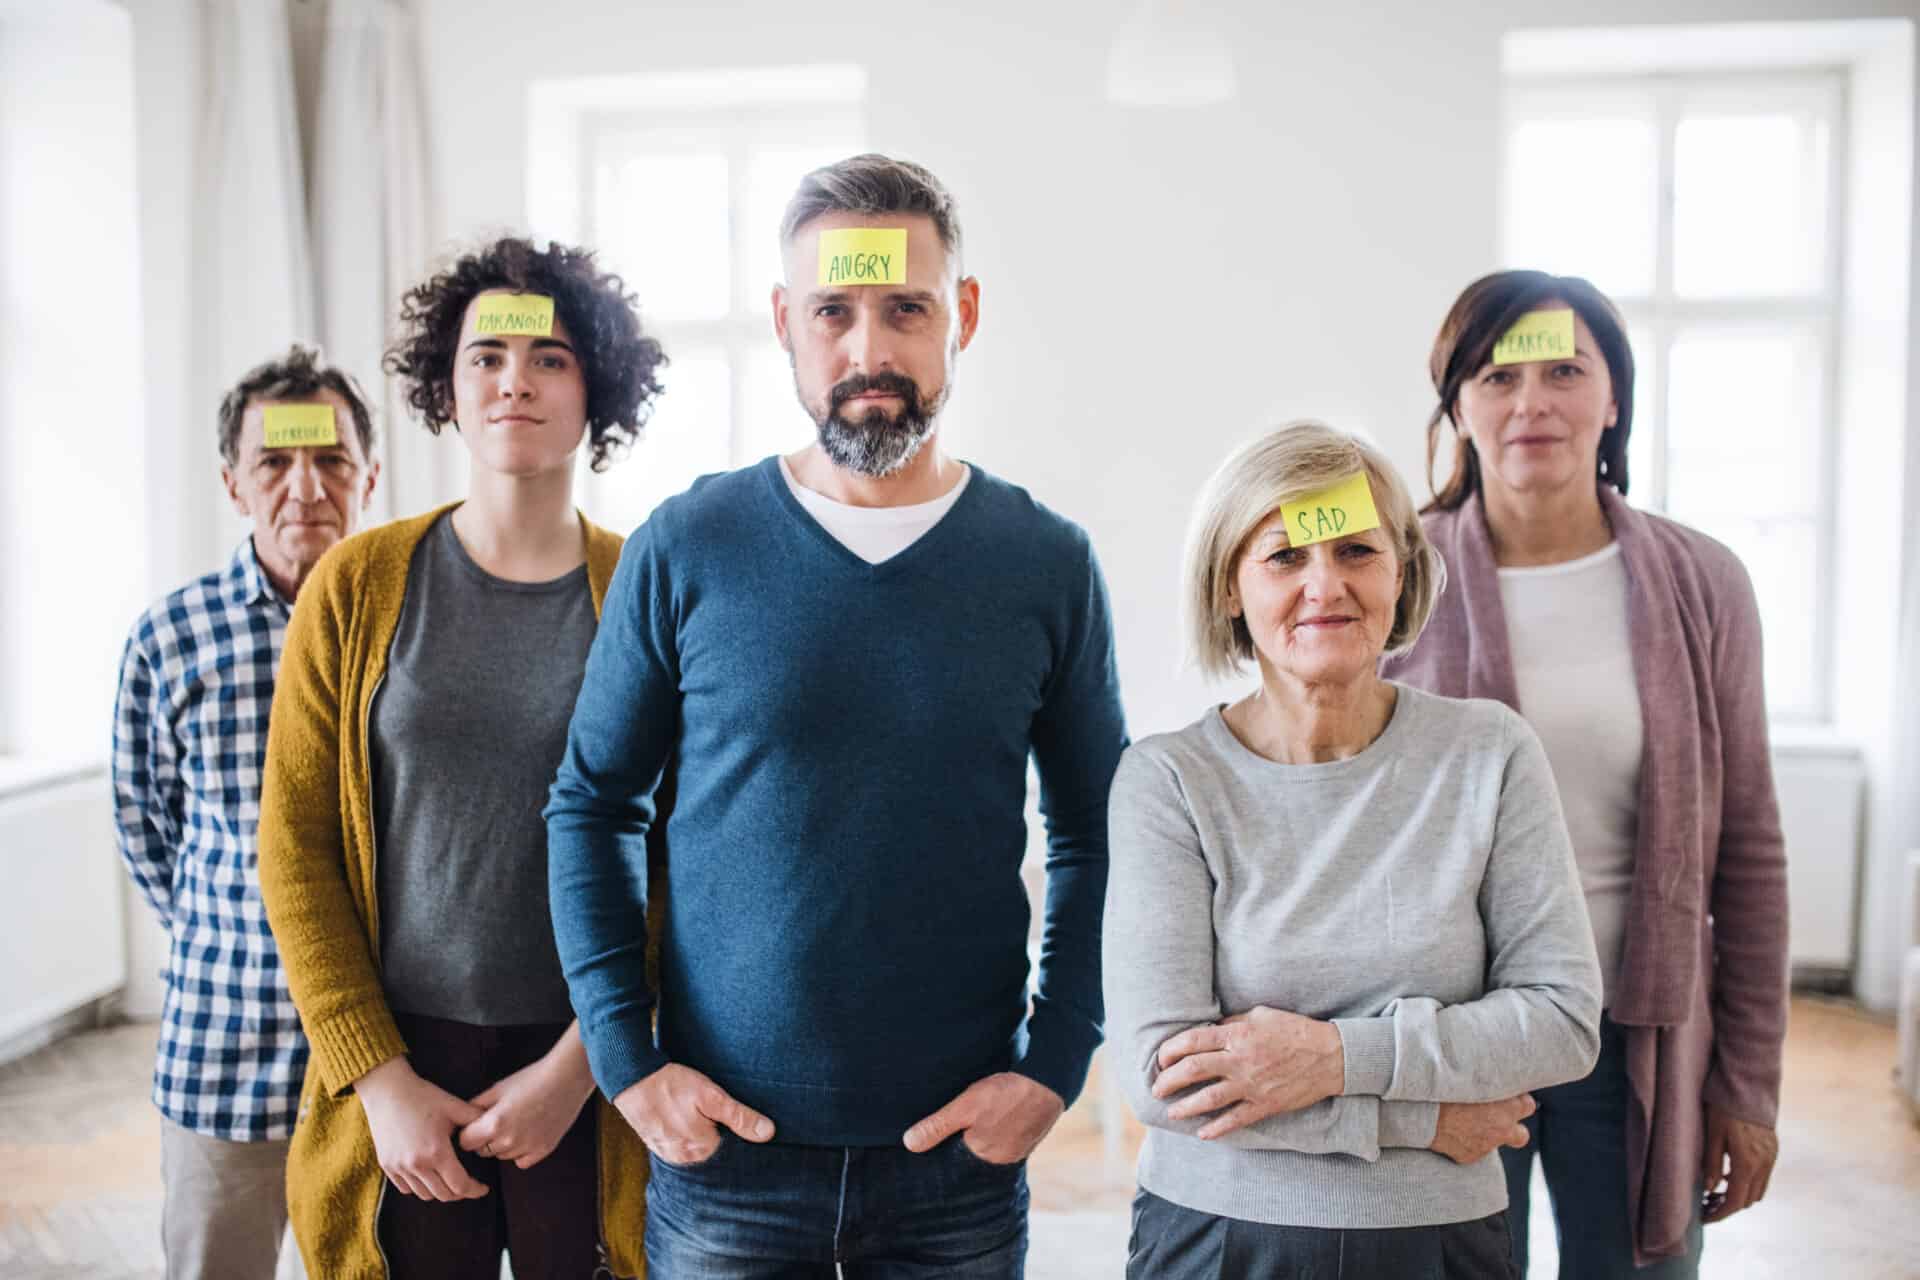 Young and old people standing with negative emotions adhesive notes during group therapy.